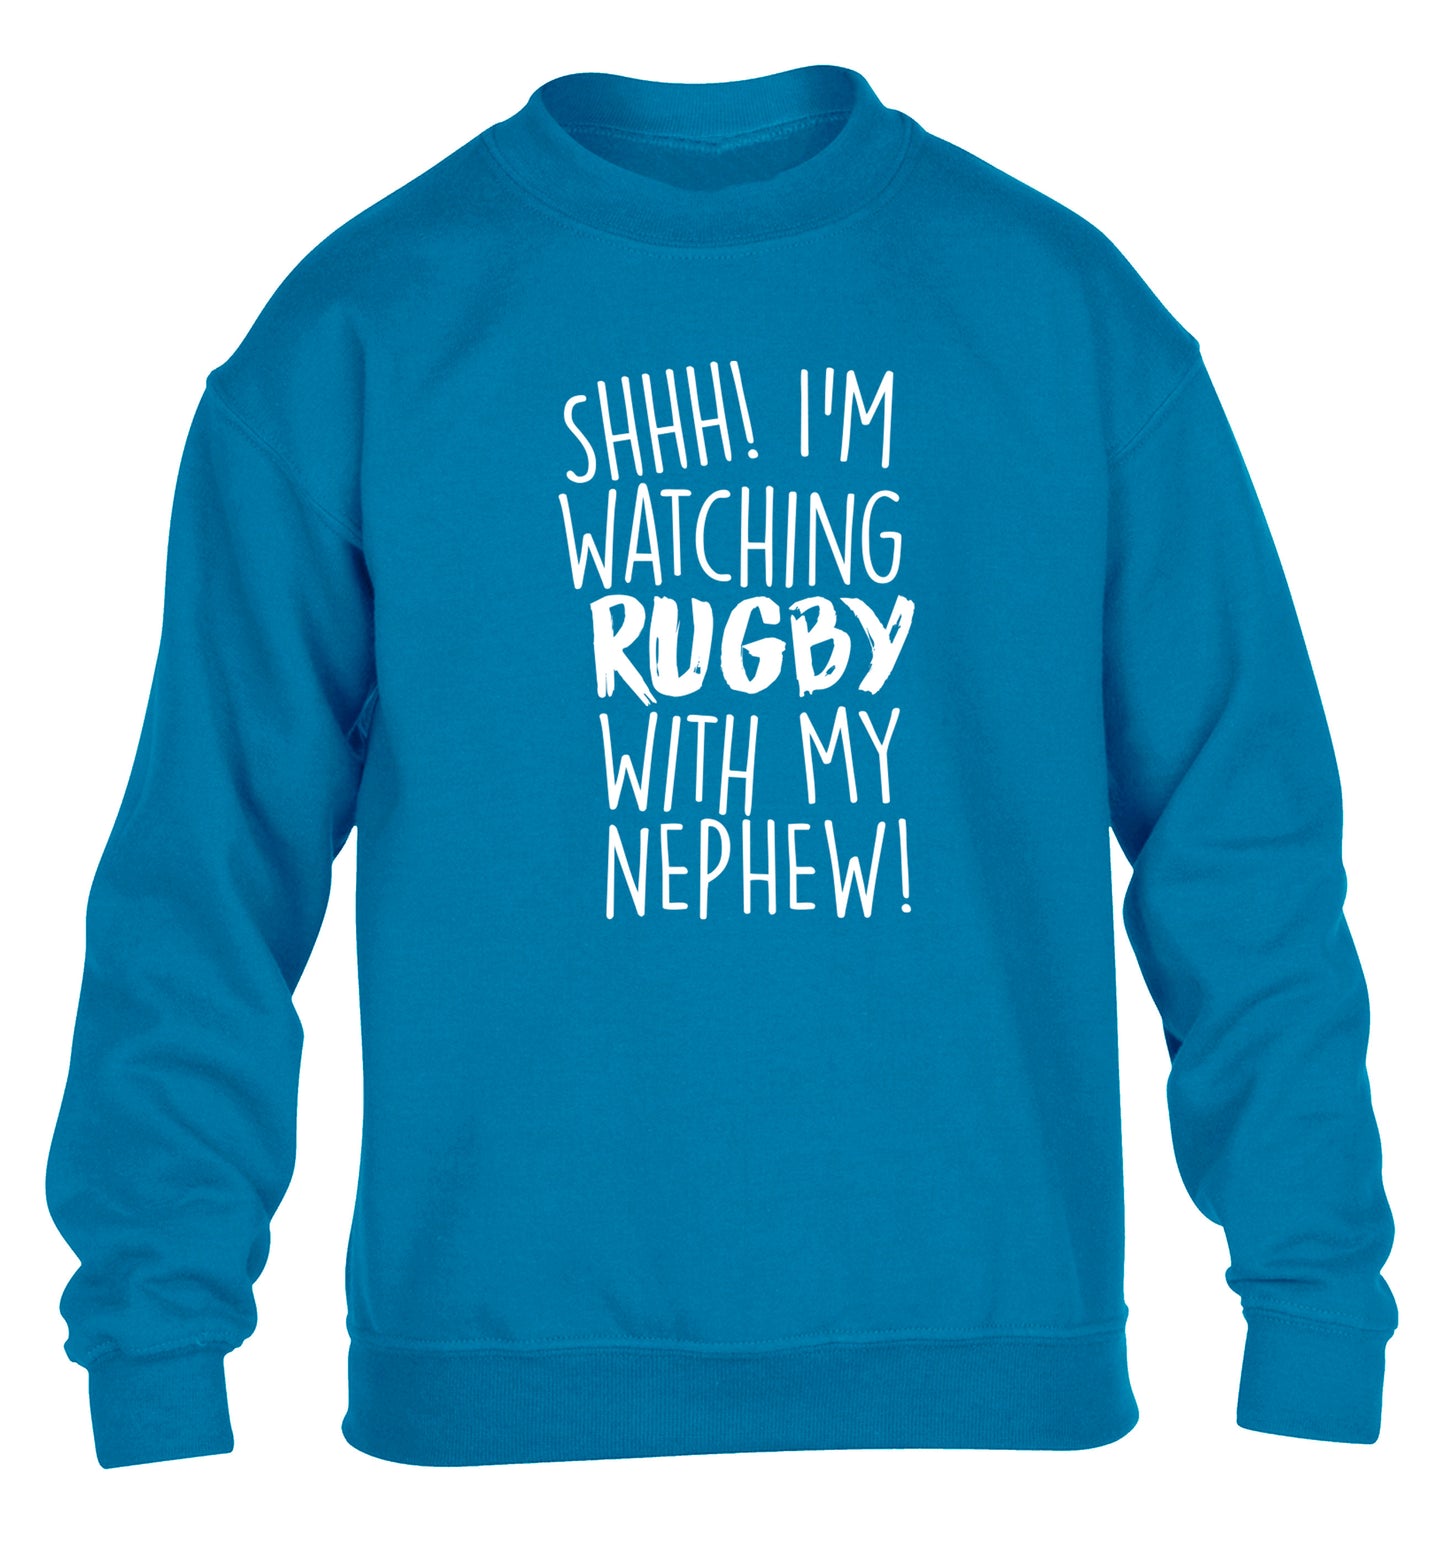 Shh.. I'm watching rugby with my nephew children's blue sweater 12-13 Years